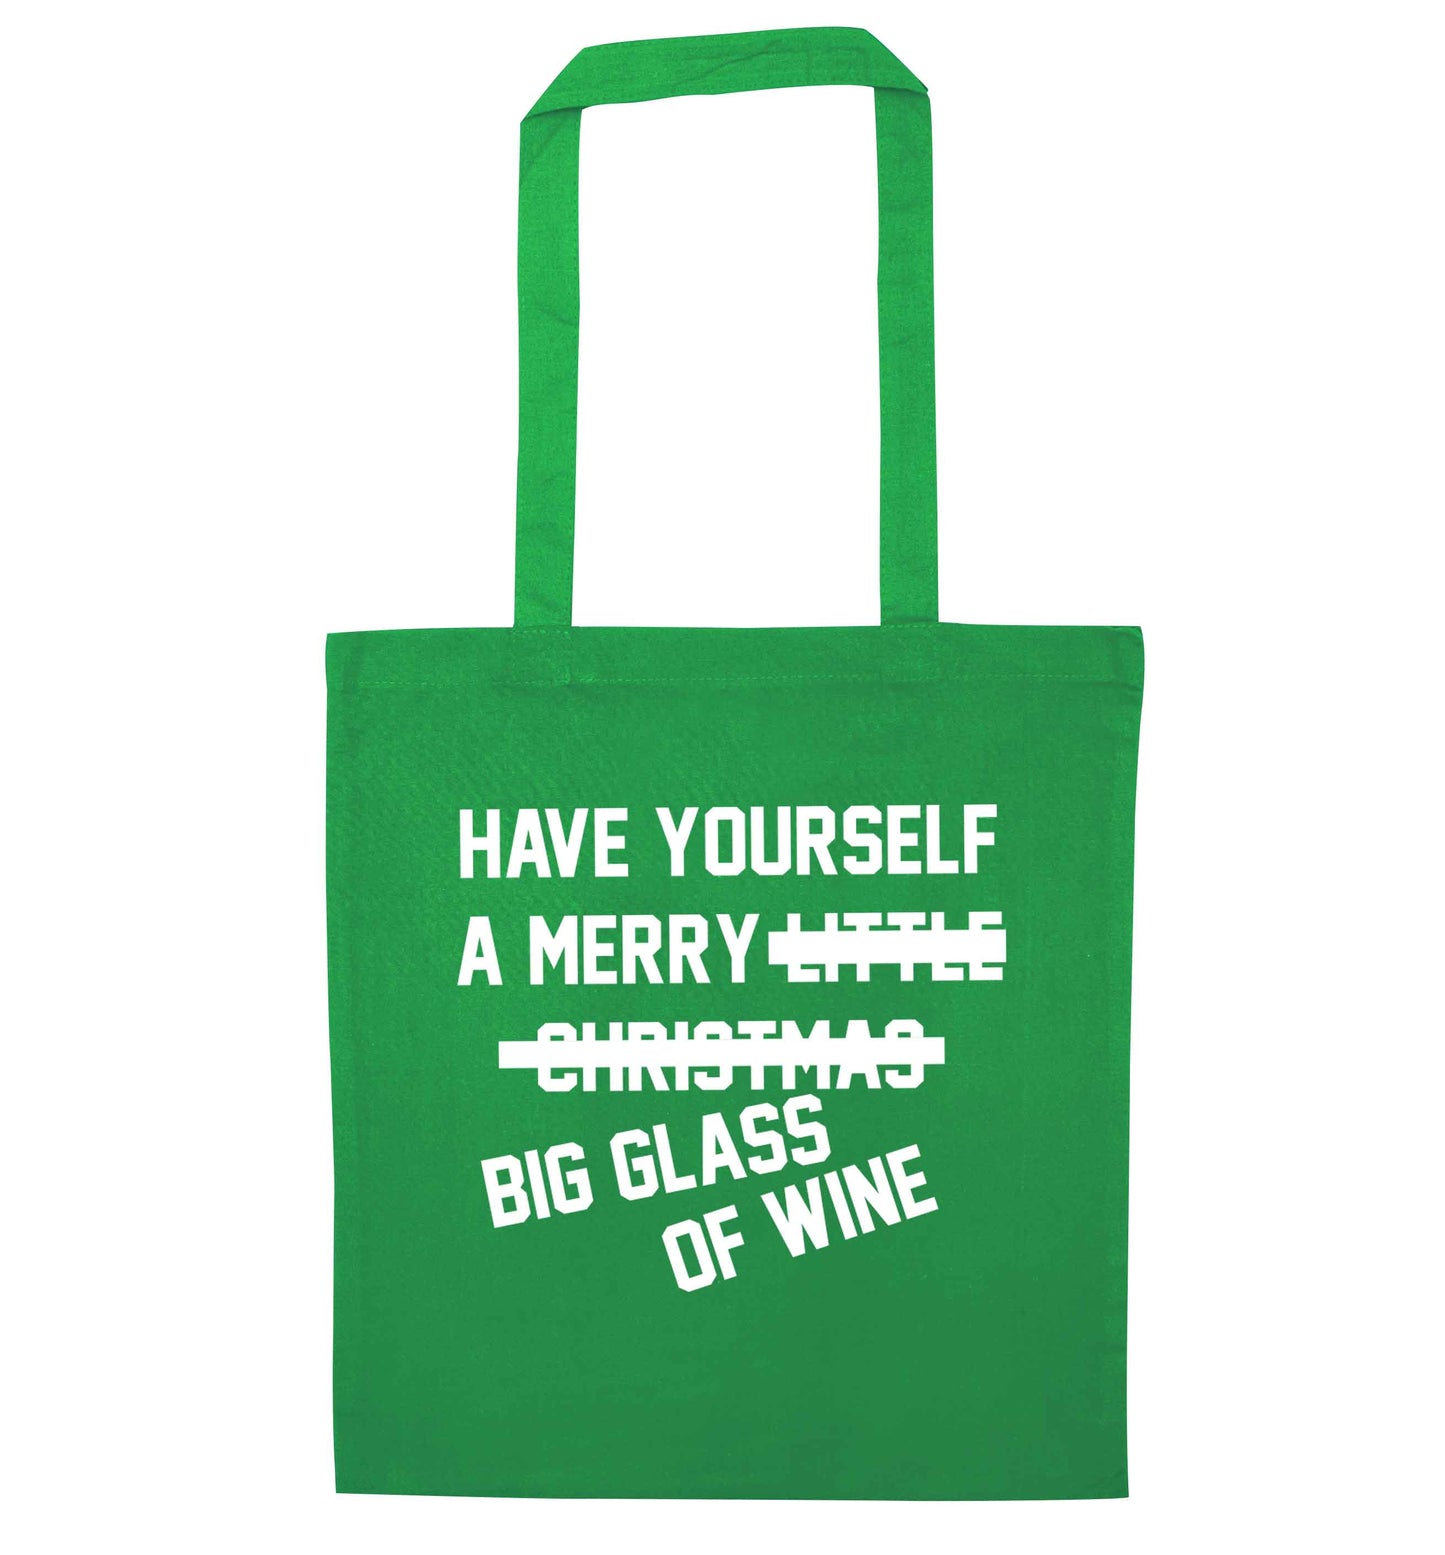 Have yourself a merry big glass of wine green tote bag